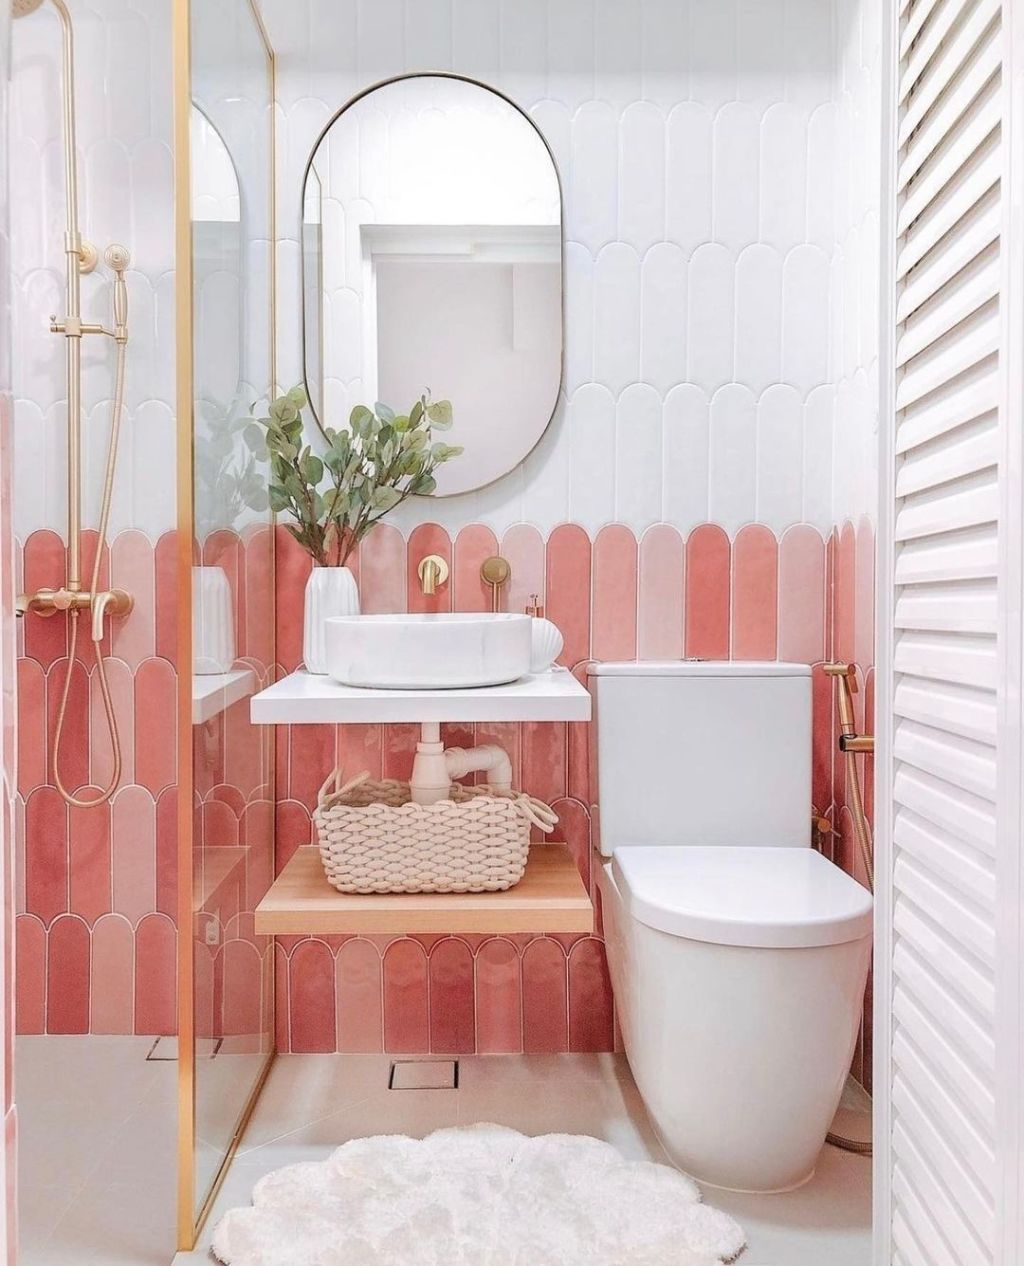 It's all about balance when it comes to pink in the bathroom. Photo: Instagram: @houseofchais